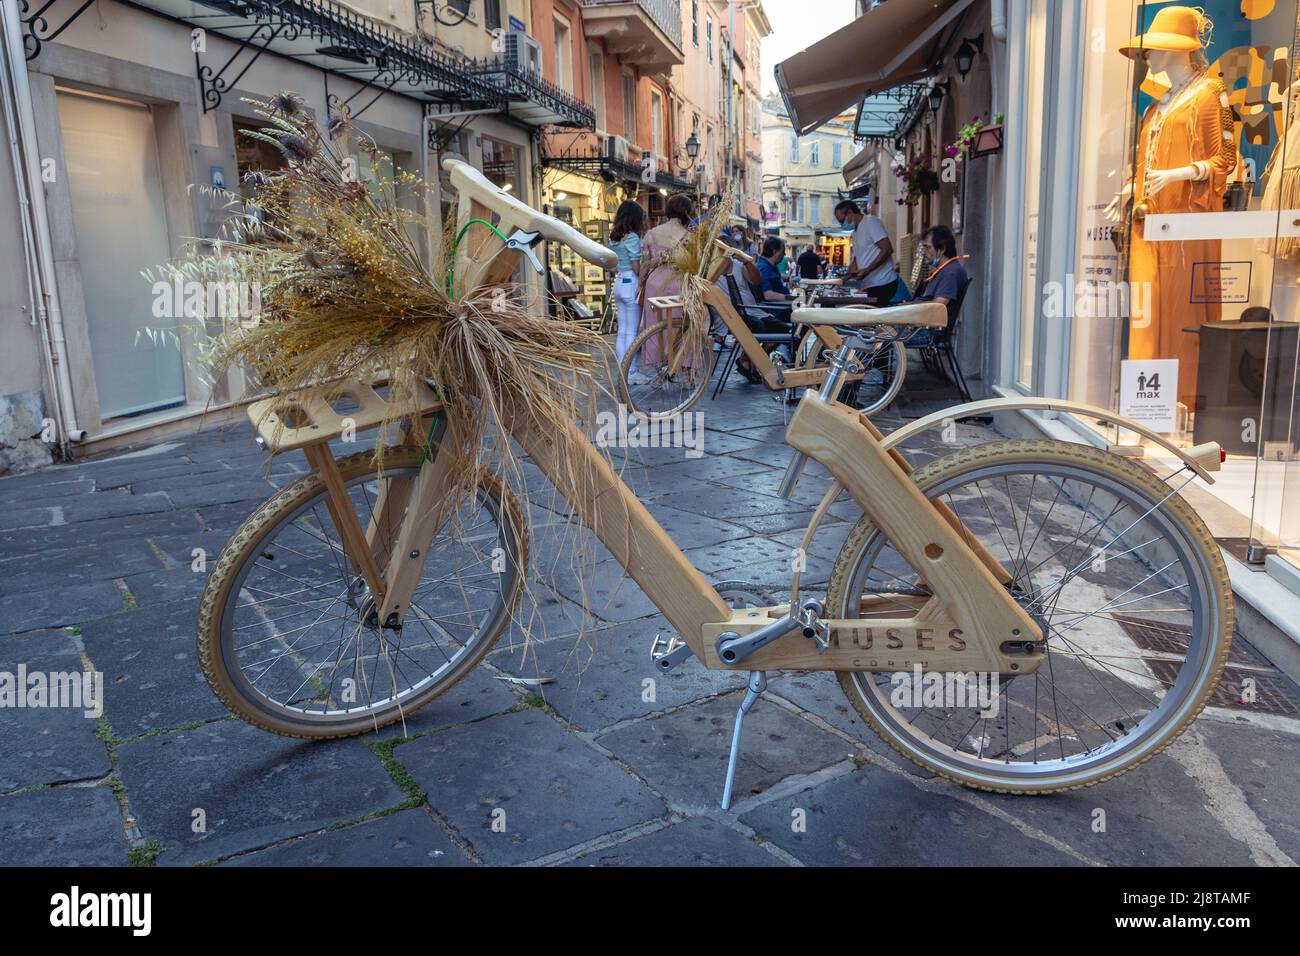 Wooden bicycle in front of Muses art things and more shop on Old Town of Corfu city on the island of Corfu, Ionian Islands, Greece Stock Photo